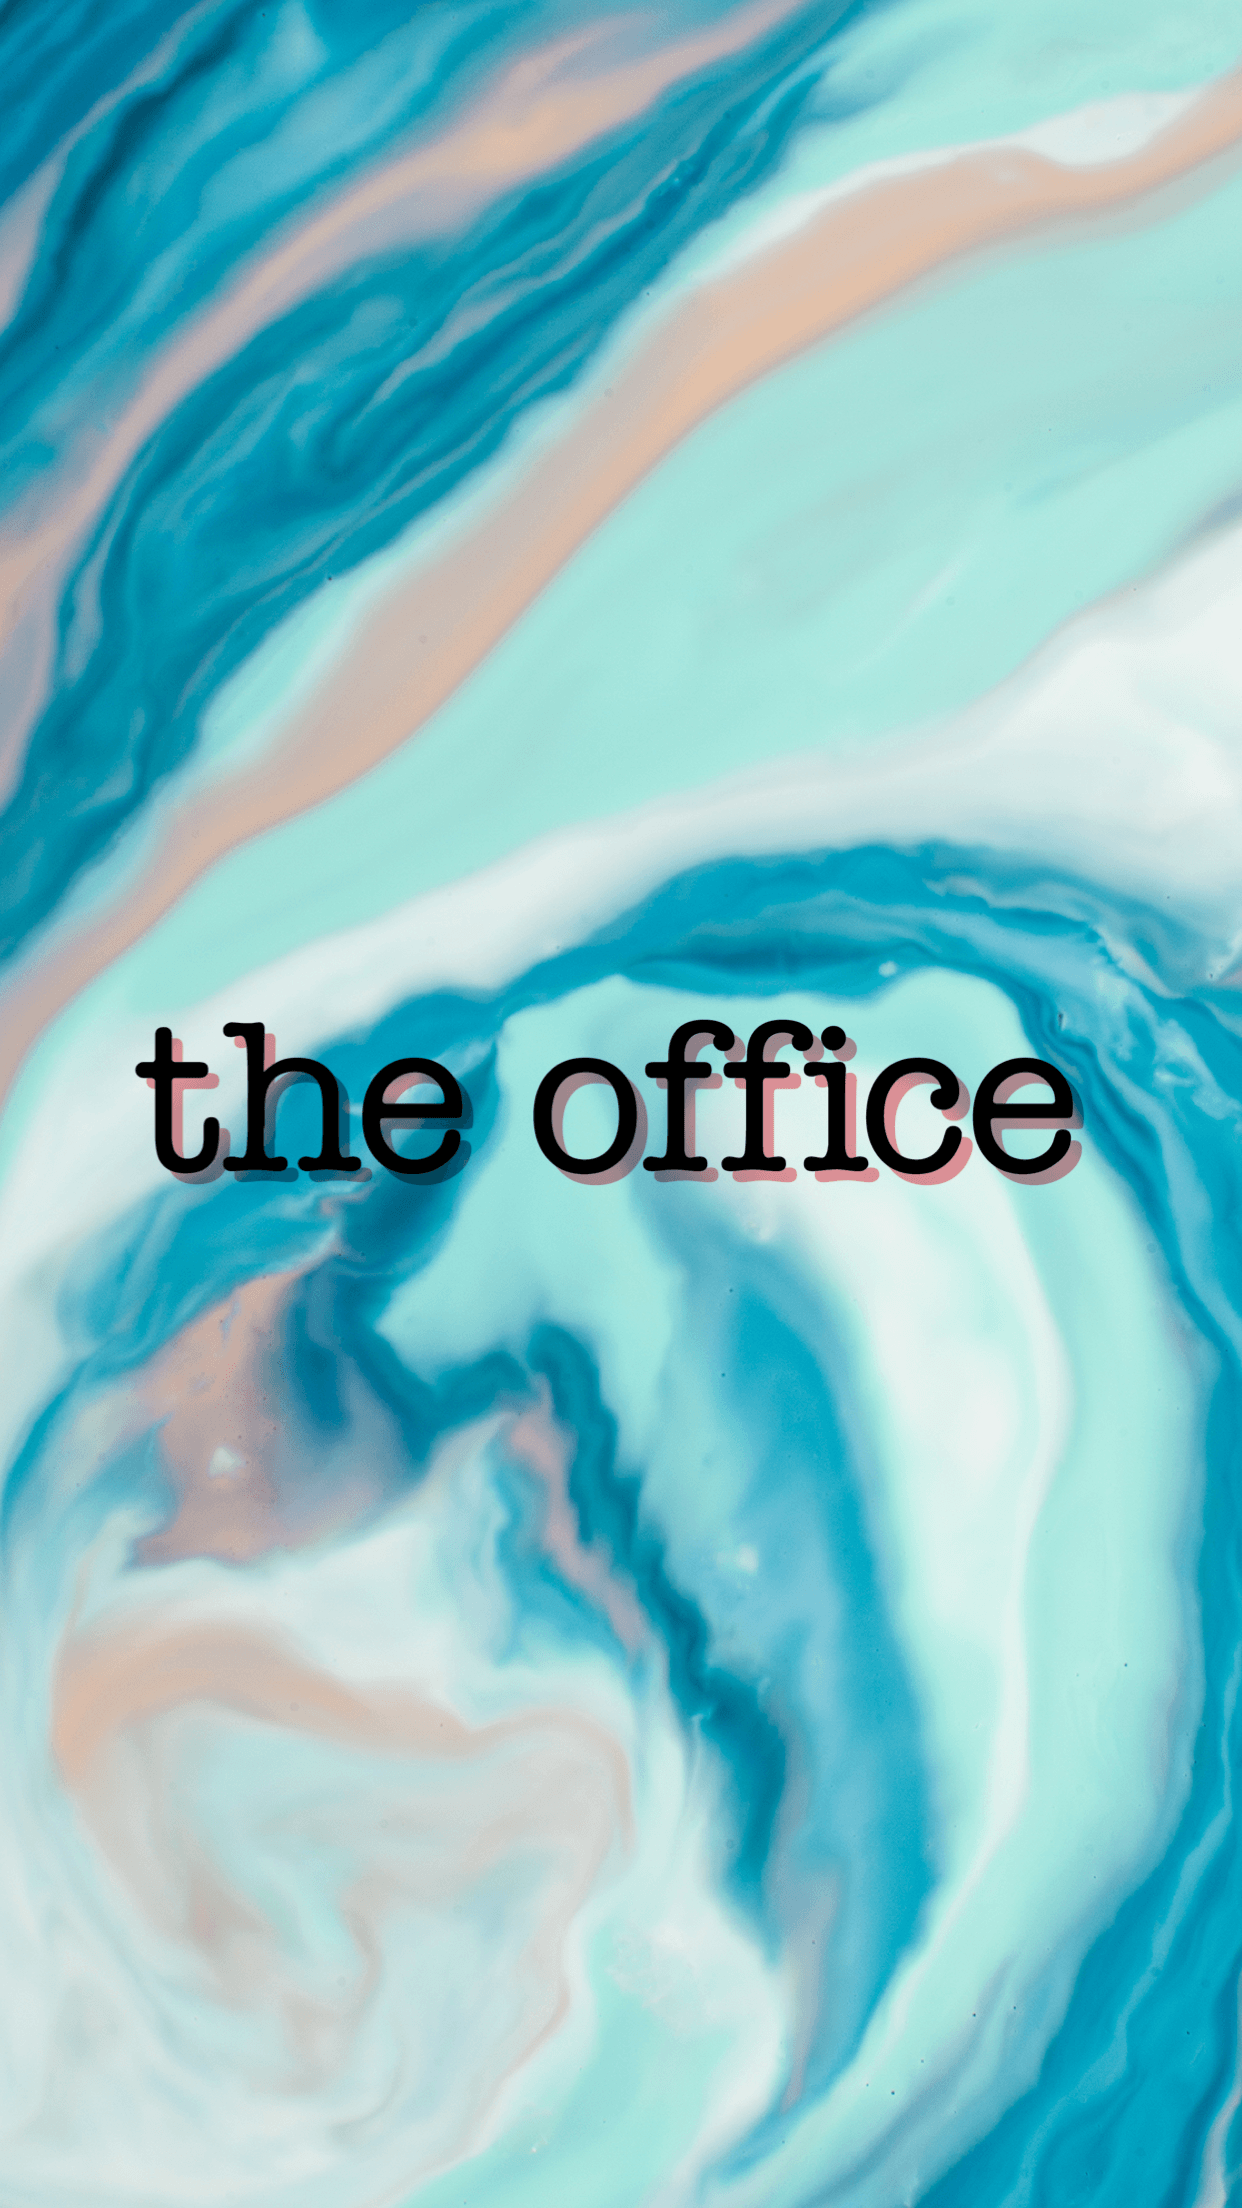 THE OFFICE. Office wallpaper